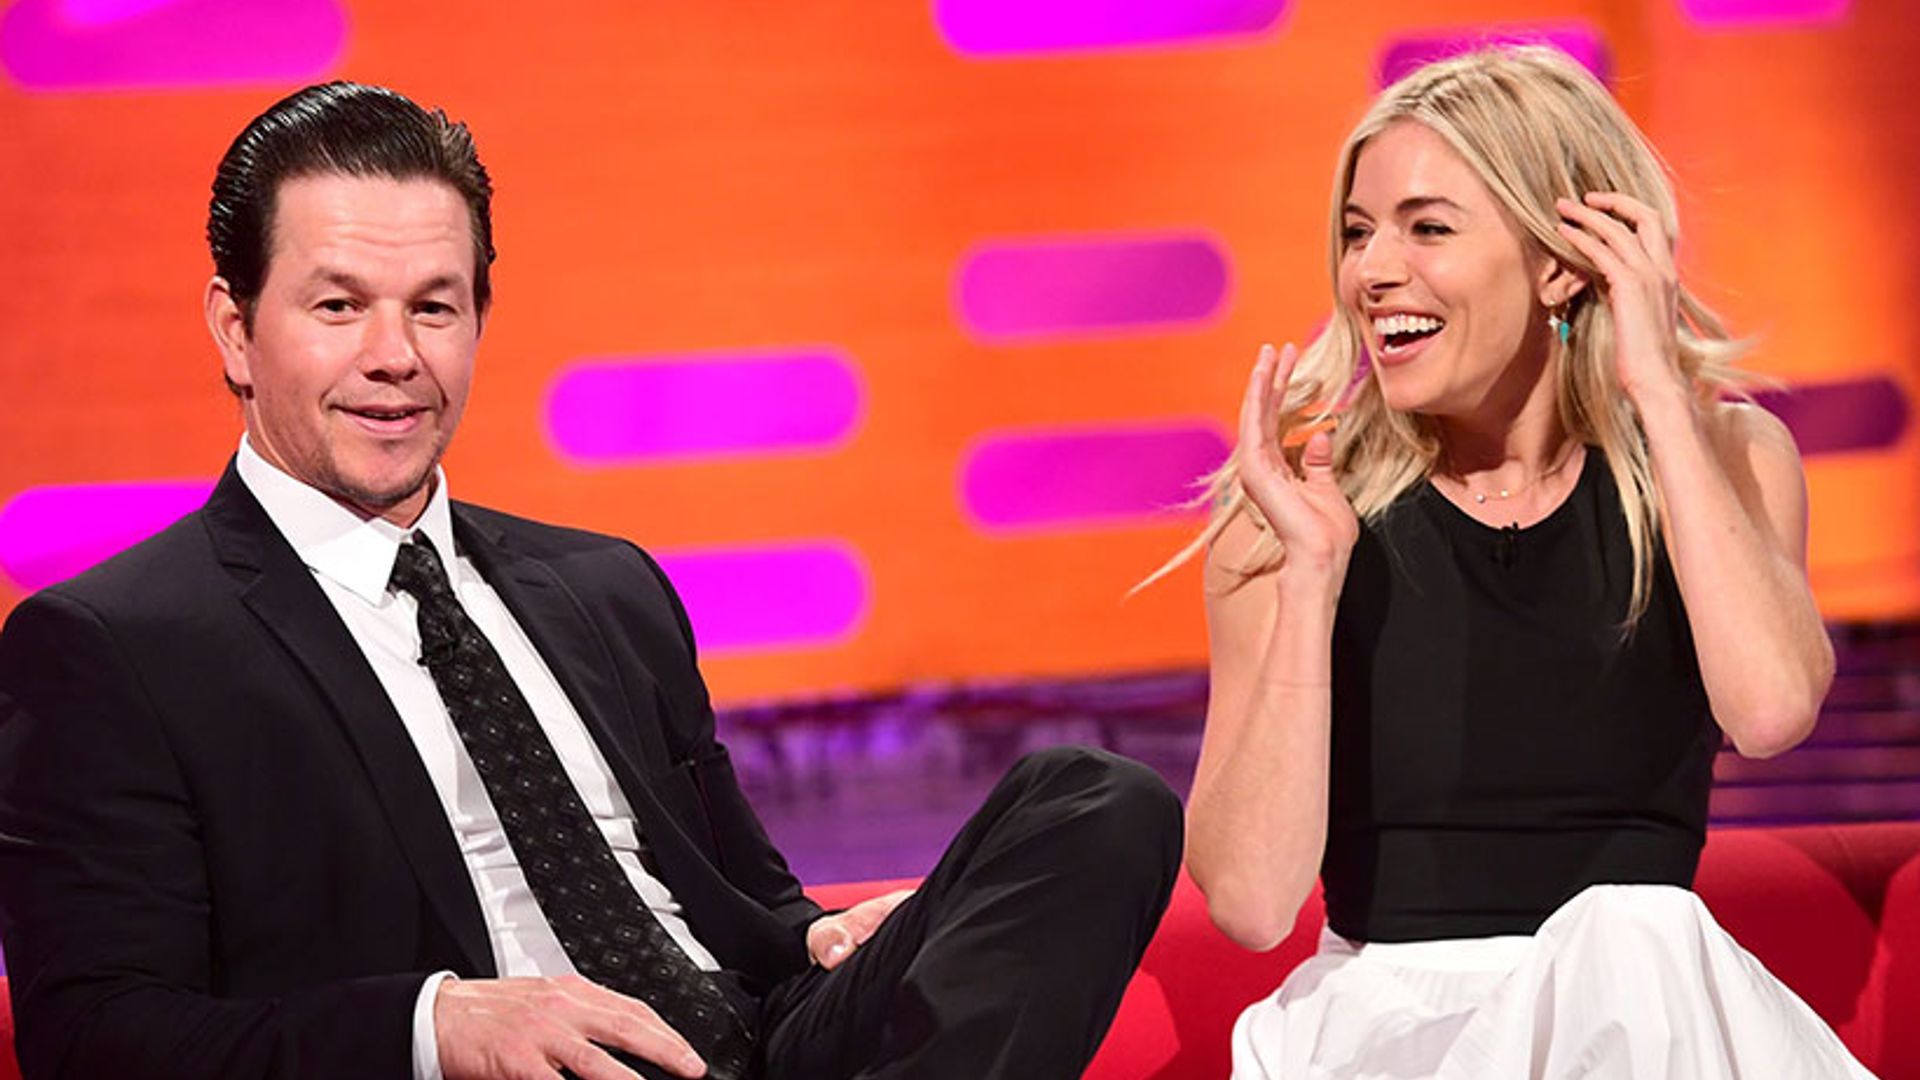 Sienna Miller reveals the embarrassing moment she first met Mark Wahlberg: 'I lactated all over him!'